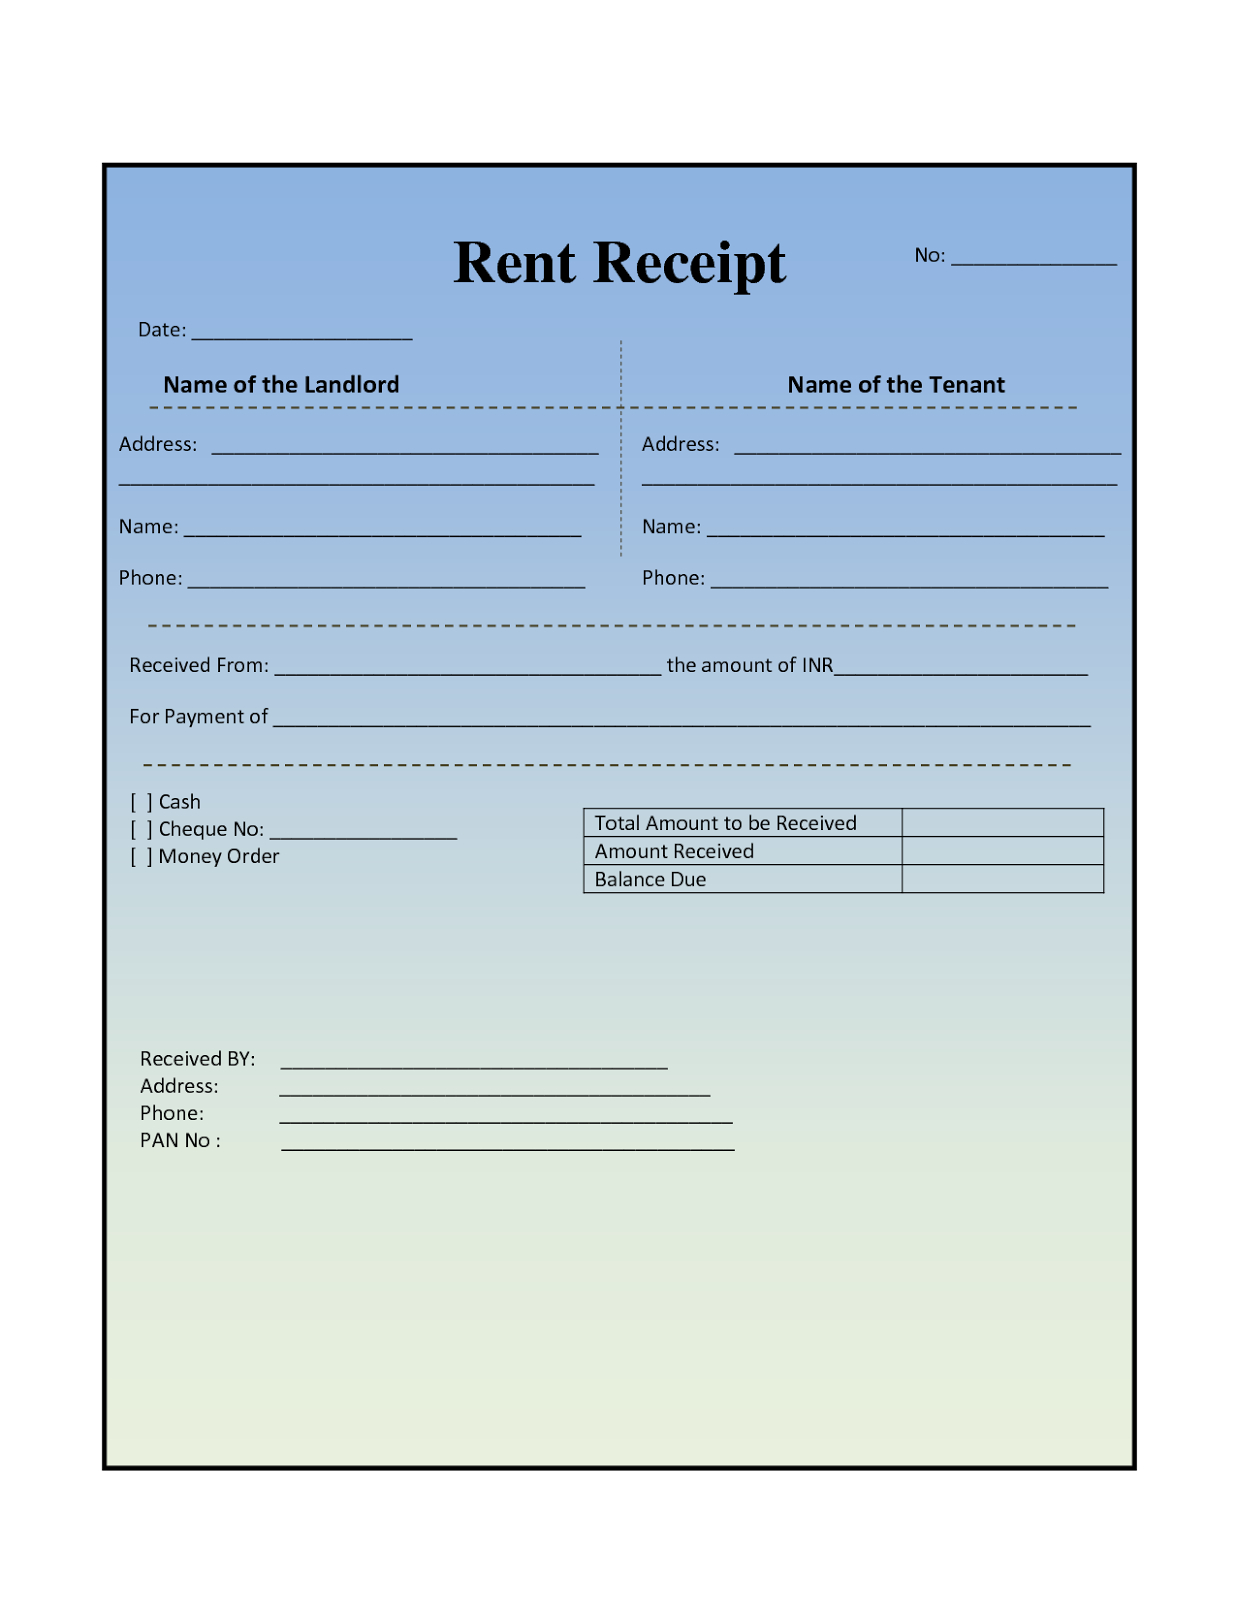 Monthly Rent Receipt Sample Template To Fill Out In Word And Pdf regarding Monthly Rent Invoice Template